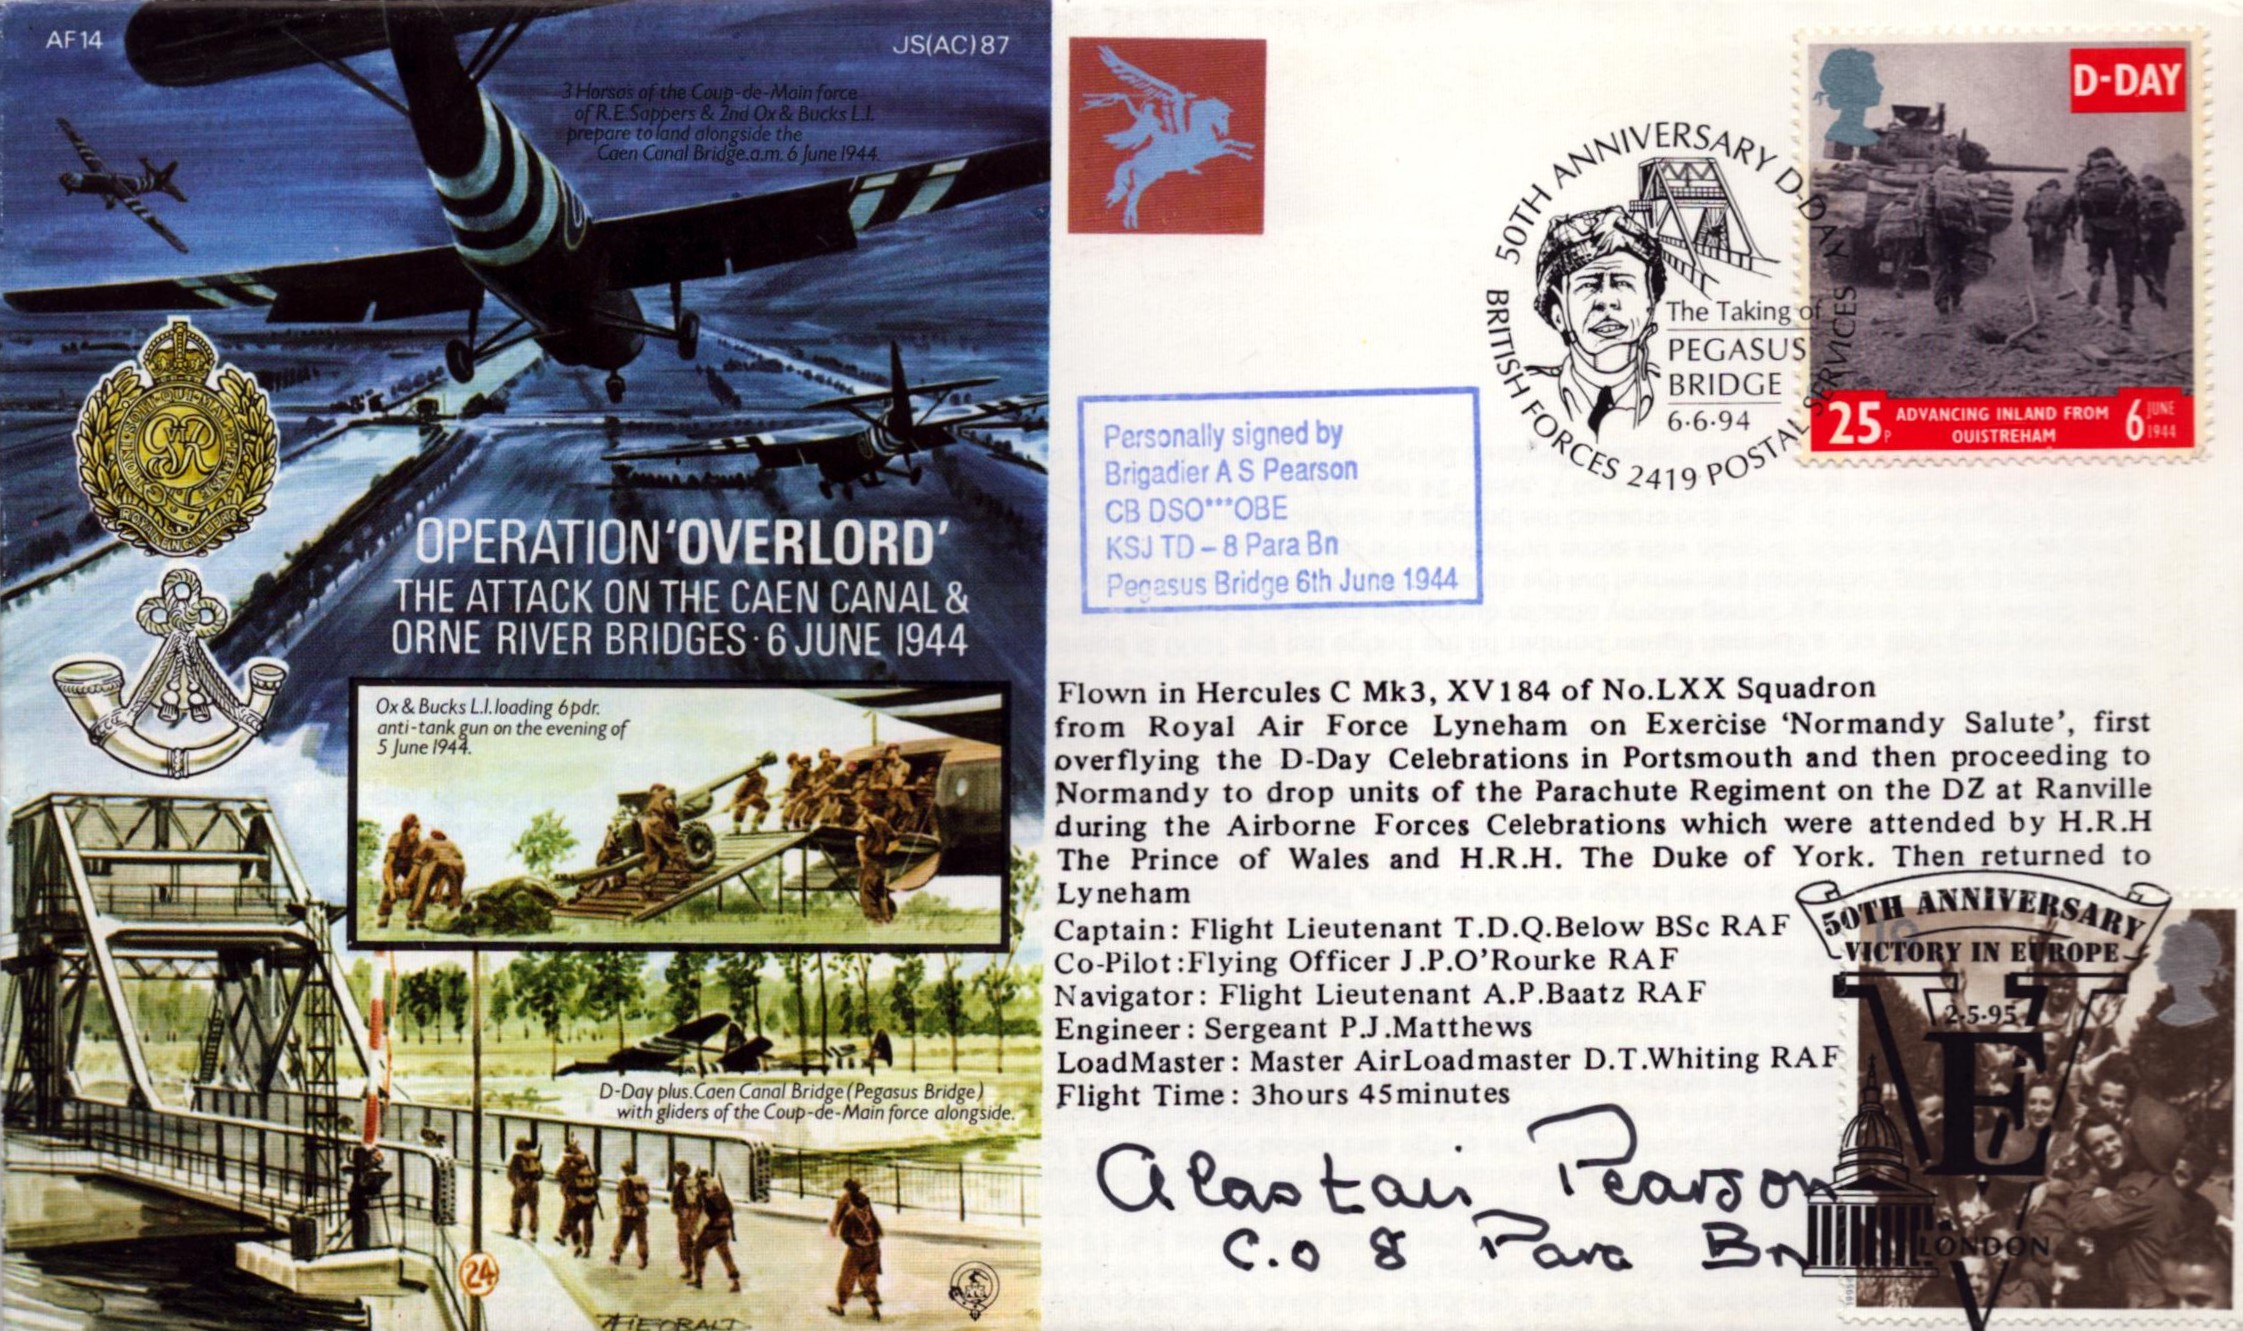 WWII Brigadier A S Pearson CB DSO OBE KSJ TD signed Operation 'Overload' commemorative flown FDC ( - Image 3 of 3